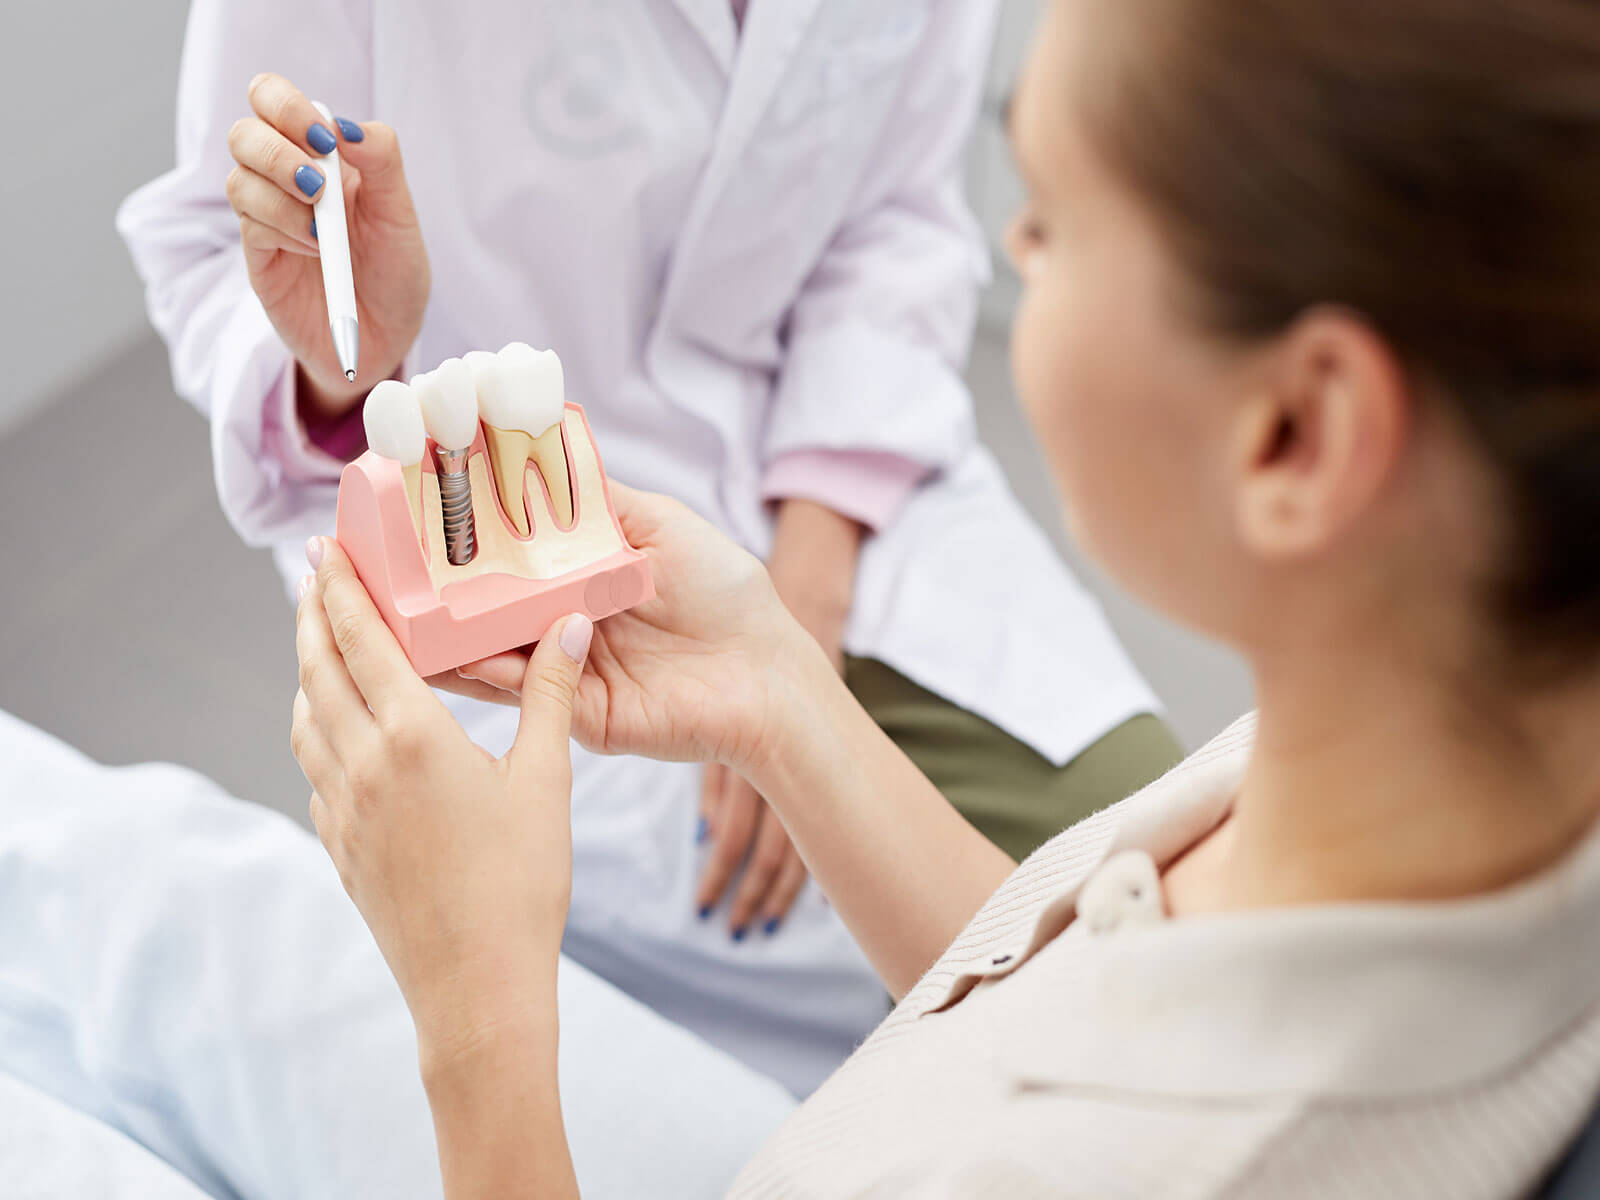 Dental Implants For Missing Molars: What Patients Should Know?